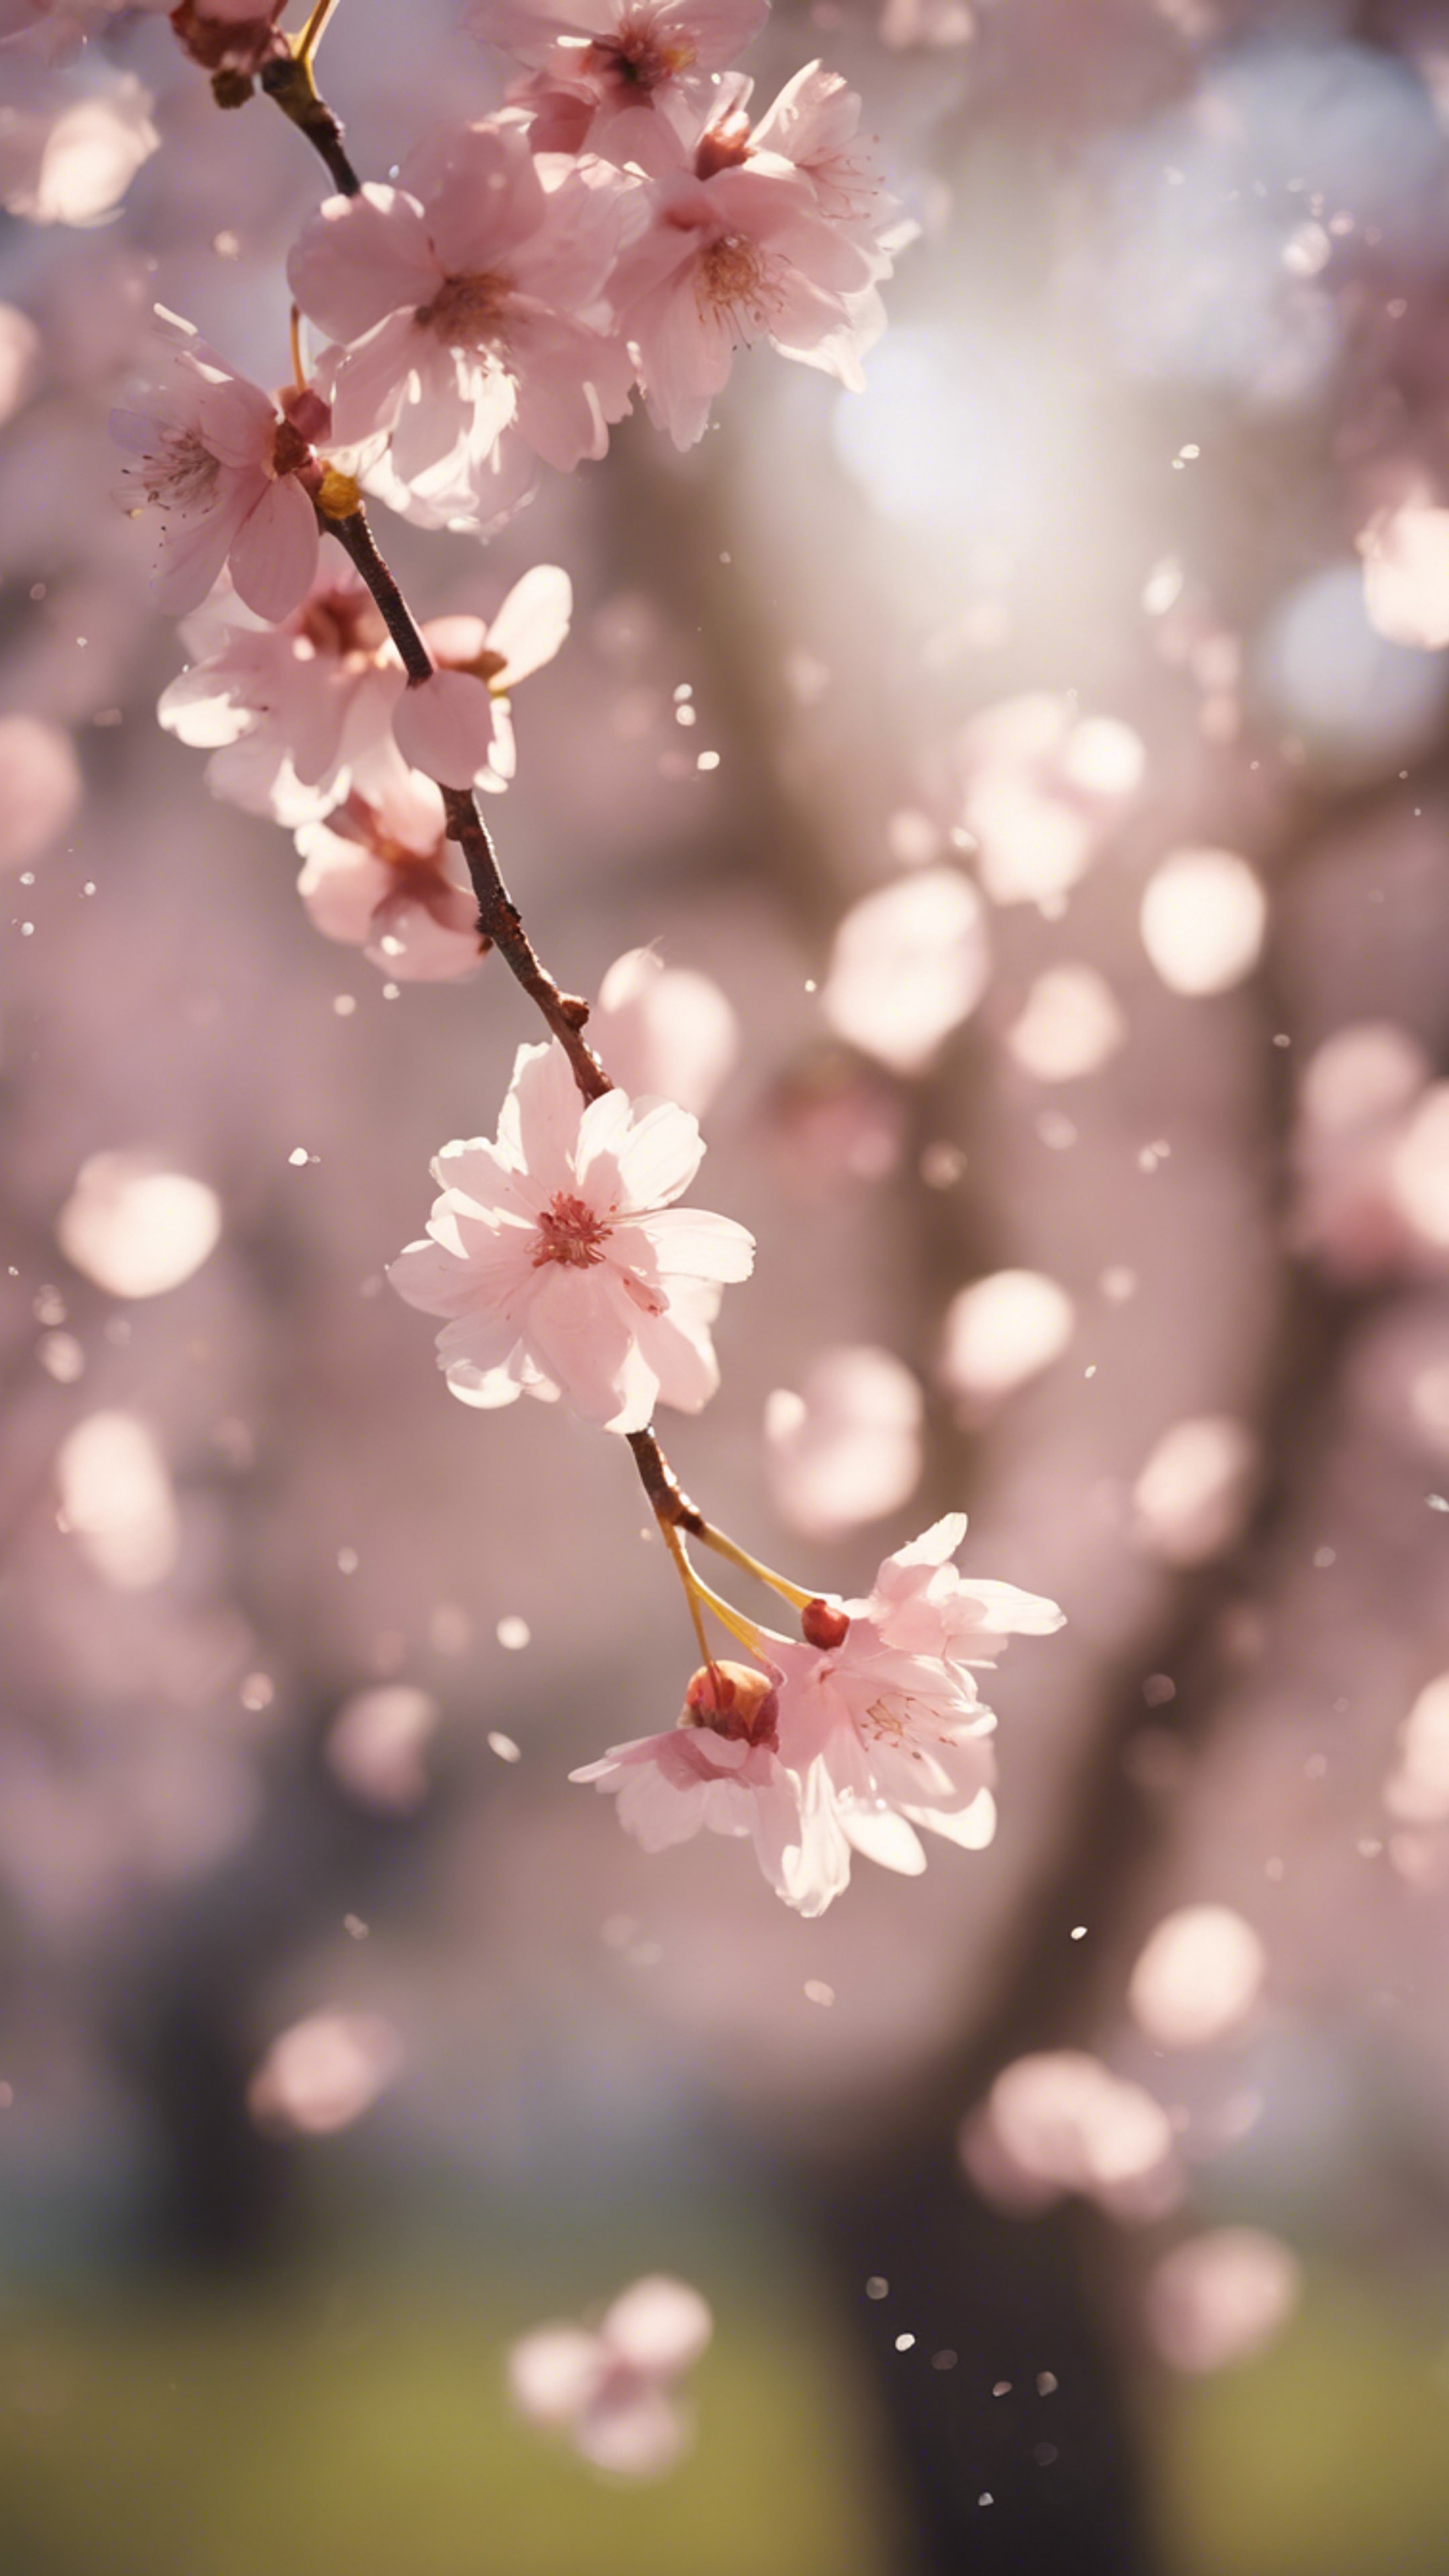 Tiny, light pink cherry blossom petals falling gently from a tree in the morning light. Sfondo[bcff163445454d48bfbe]